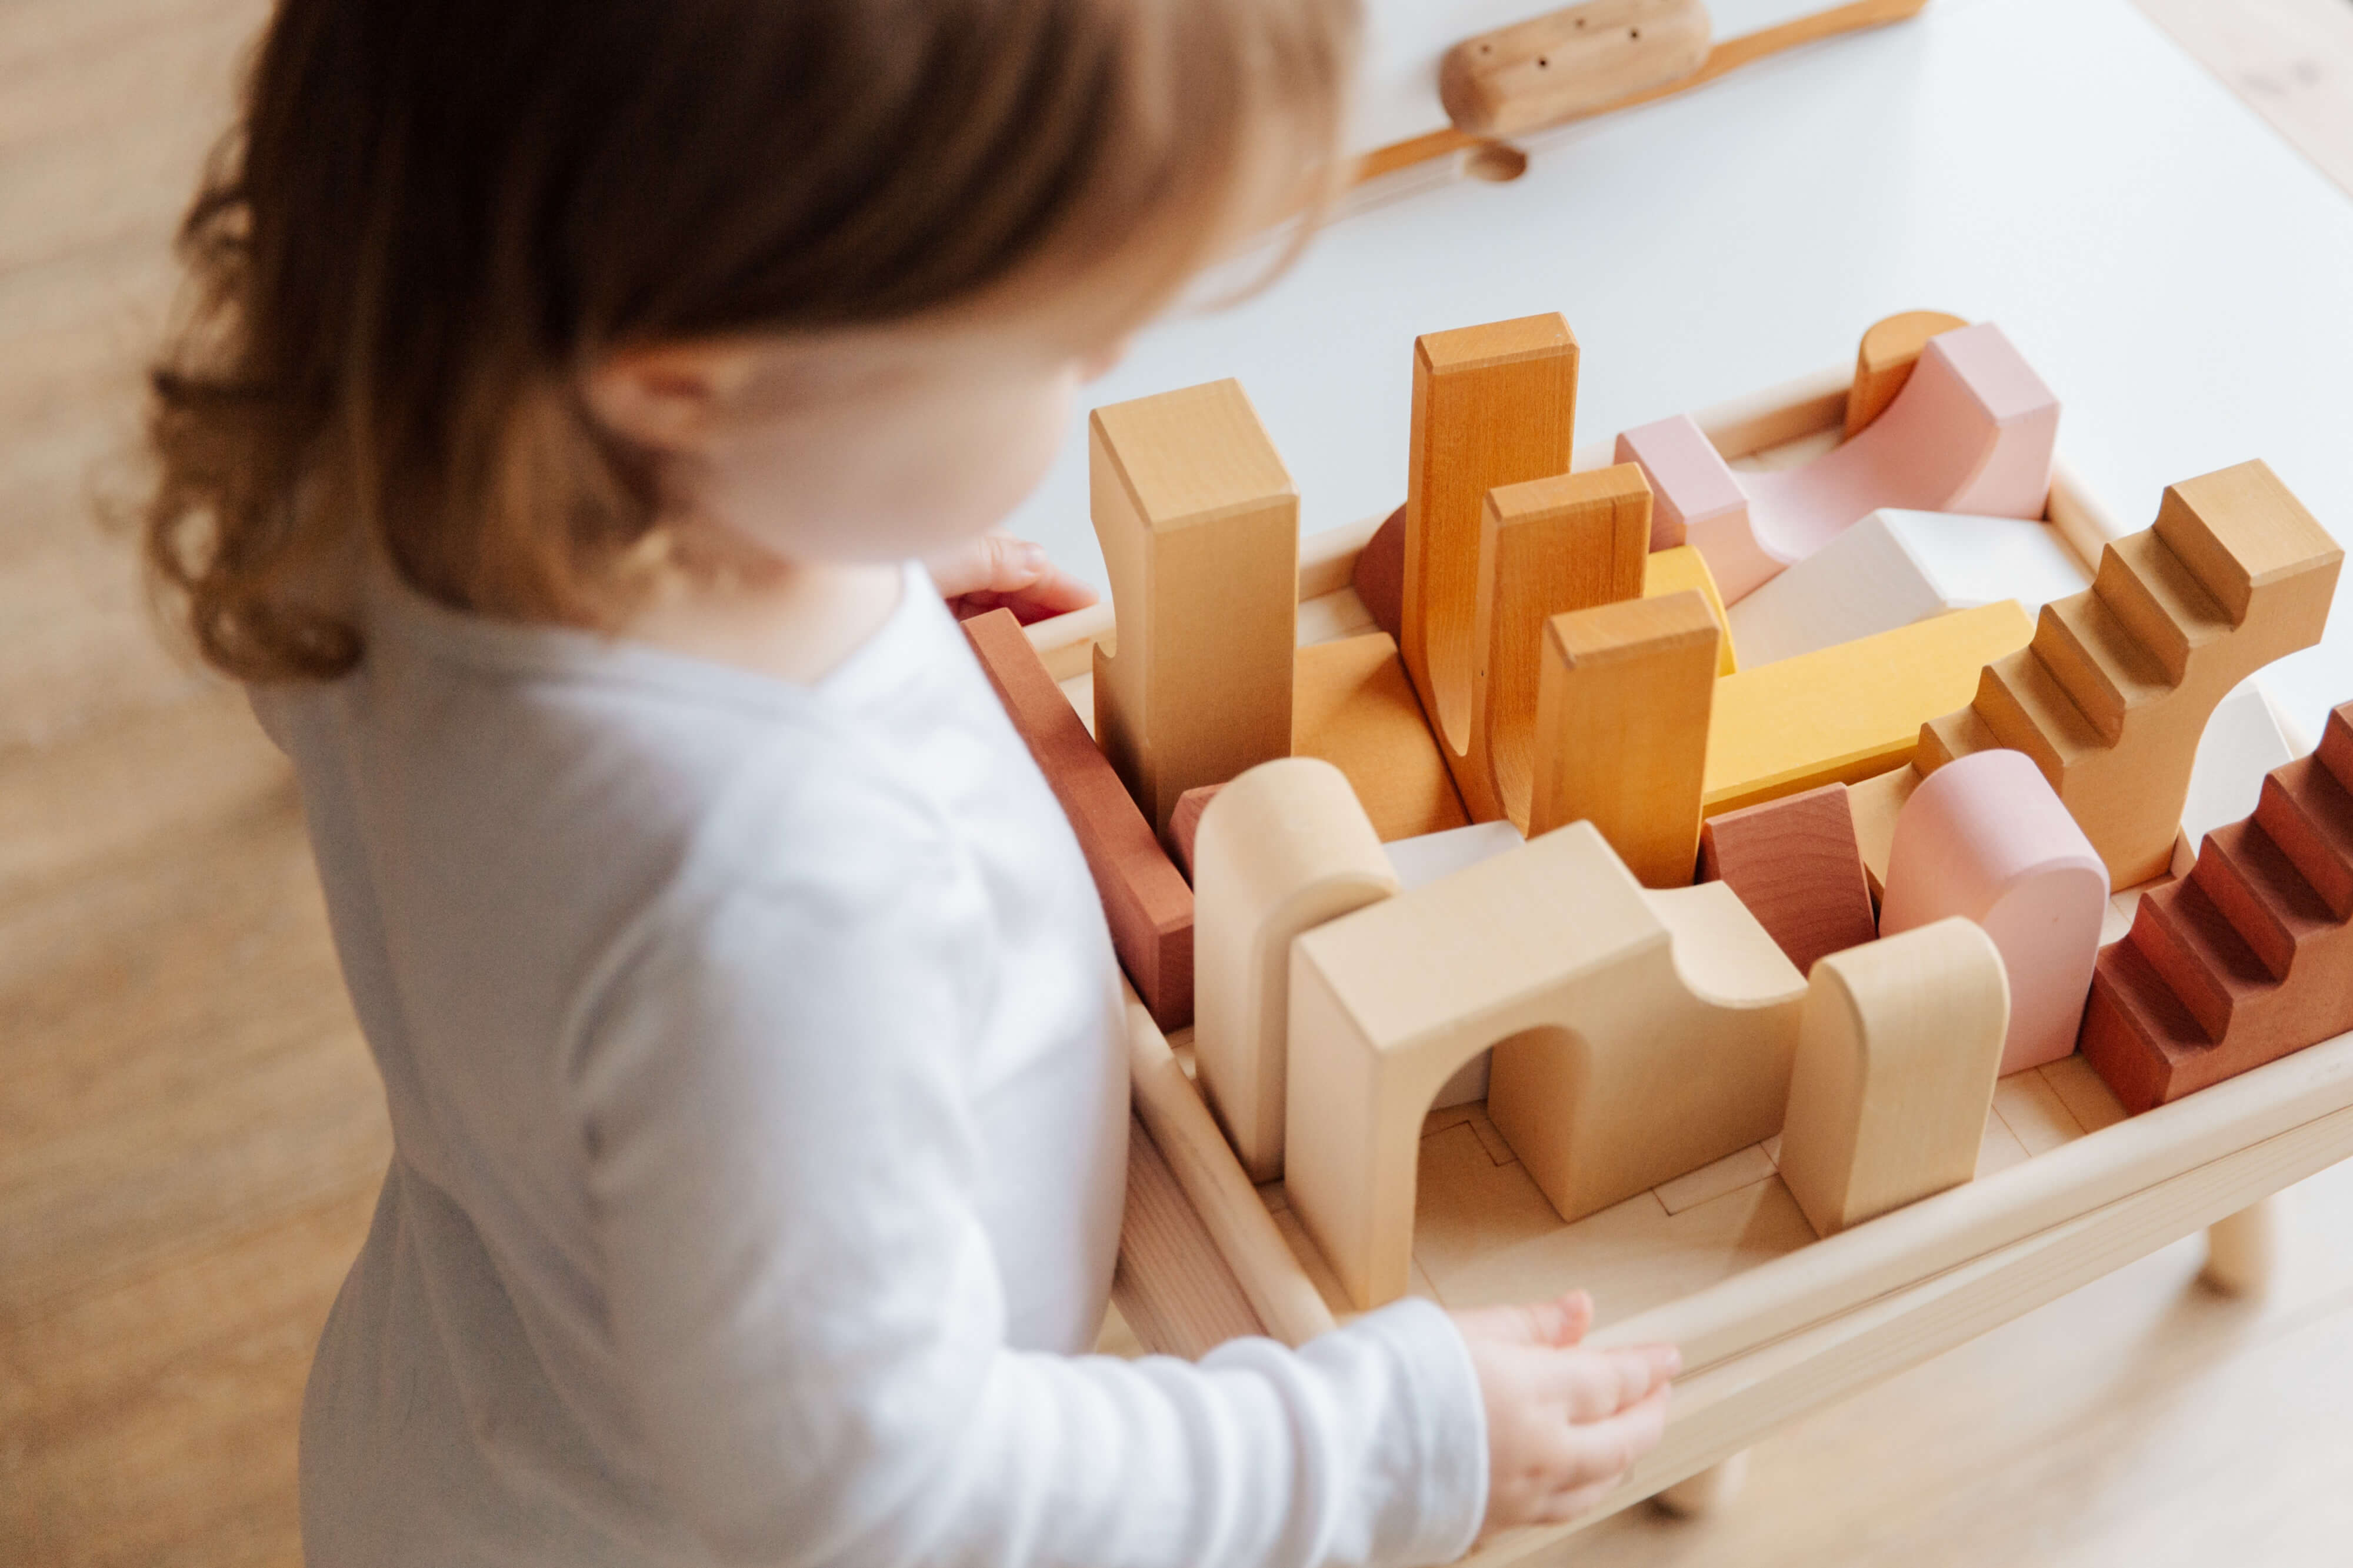 A toddler playing with wooden blocks